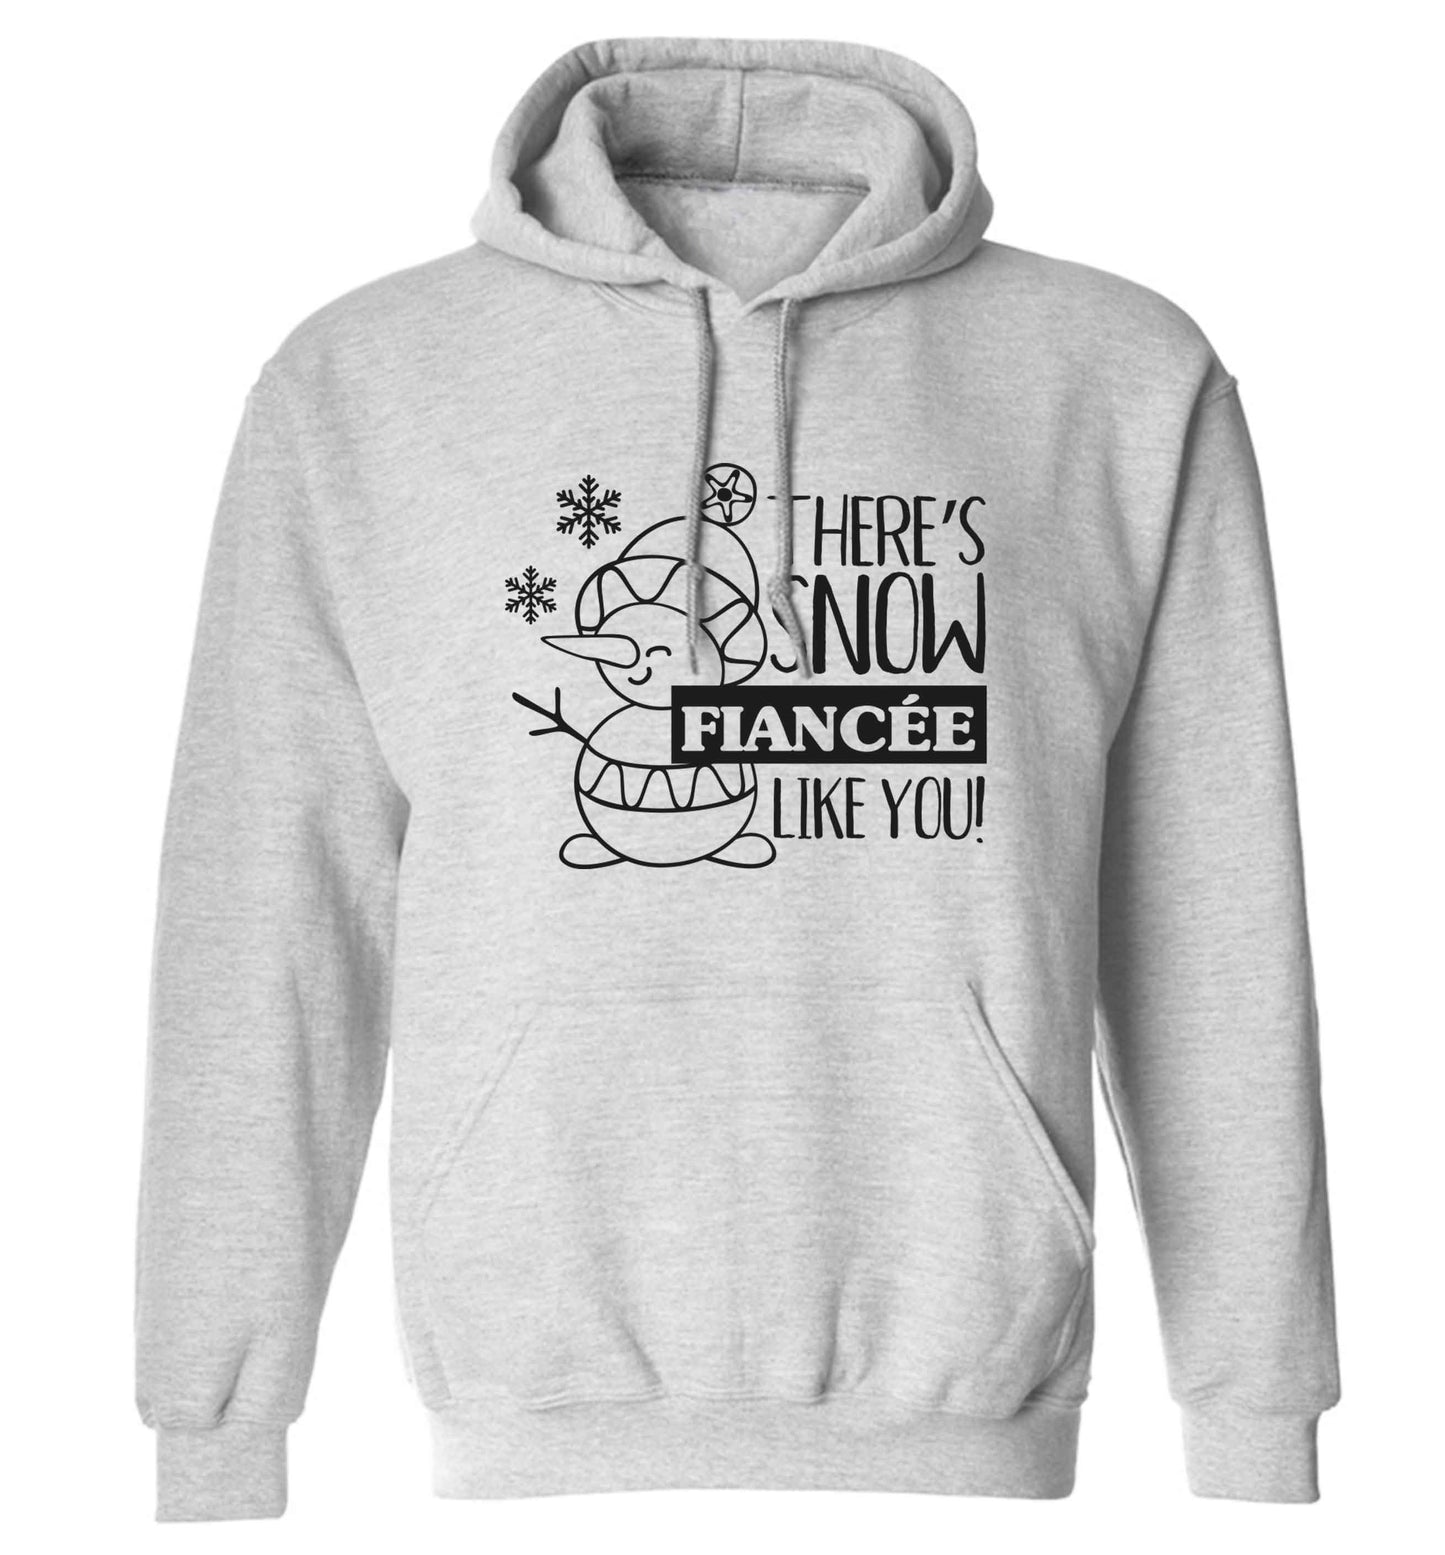 There's snow fiancee like you adults unisex grey hoodie 2XL